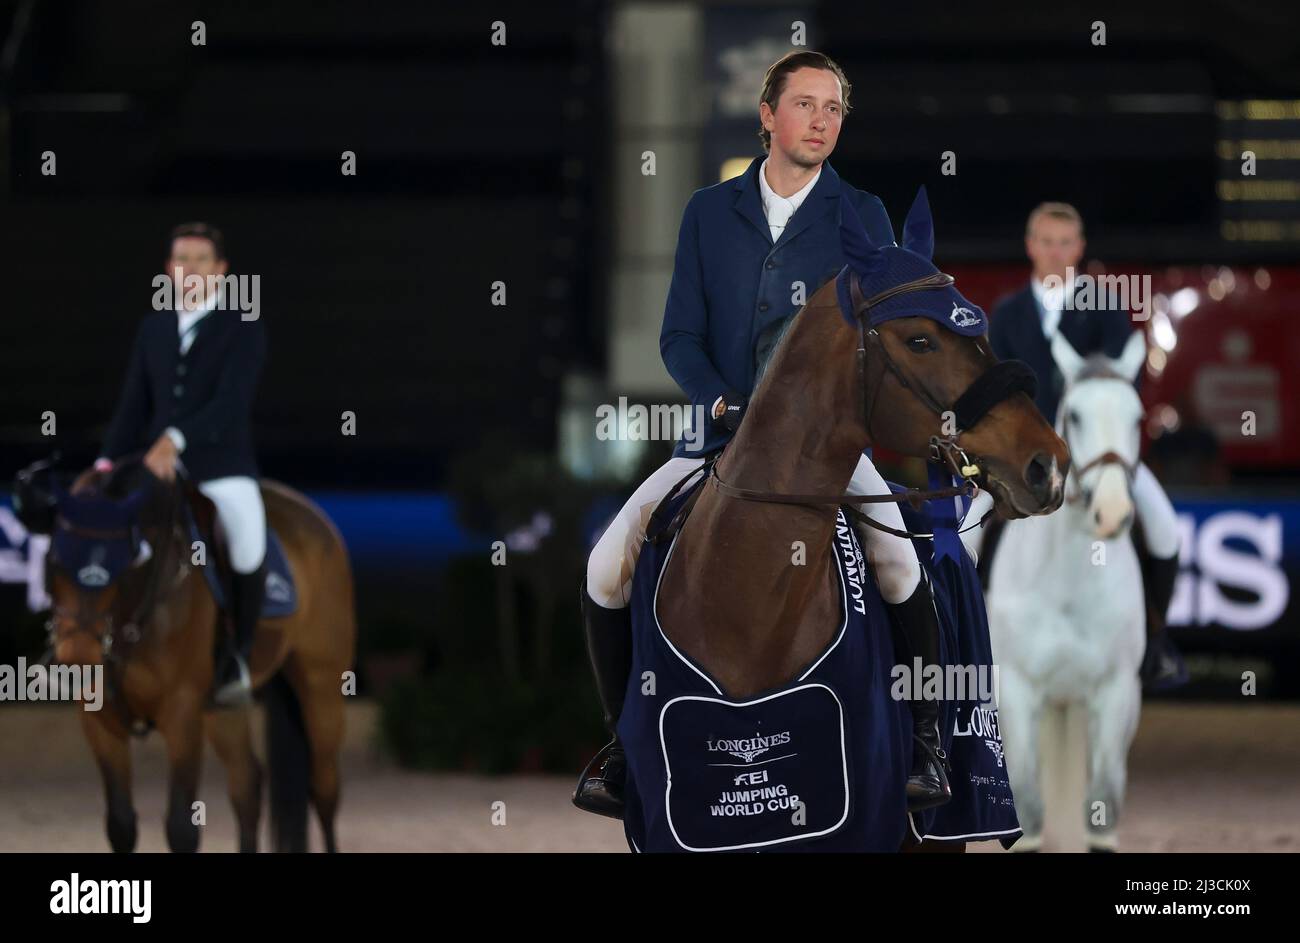 Leipzig, Germany. 07th Apr, 2022. Martin Fuchs from Switzerland wins the 1st final of the Longines Fei Jumping World Cup at the Leipzig Fair on Chaplin. Credit: Jan Woitas/dpa/Alamy Live News Stock Photo